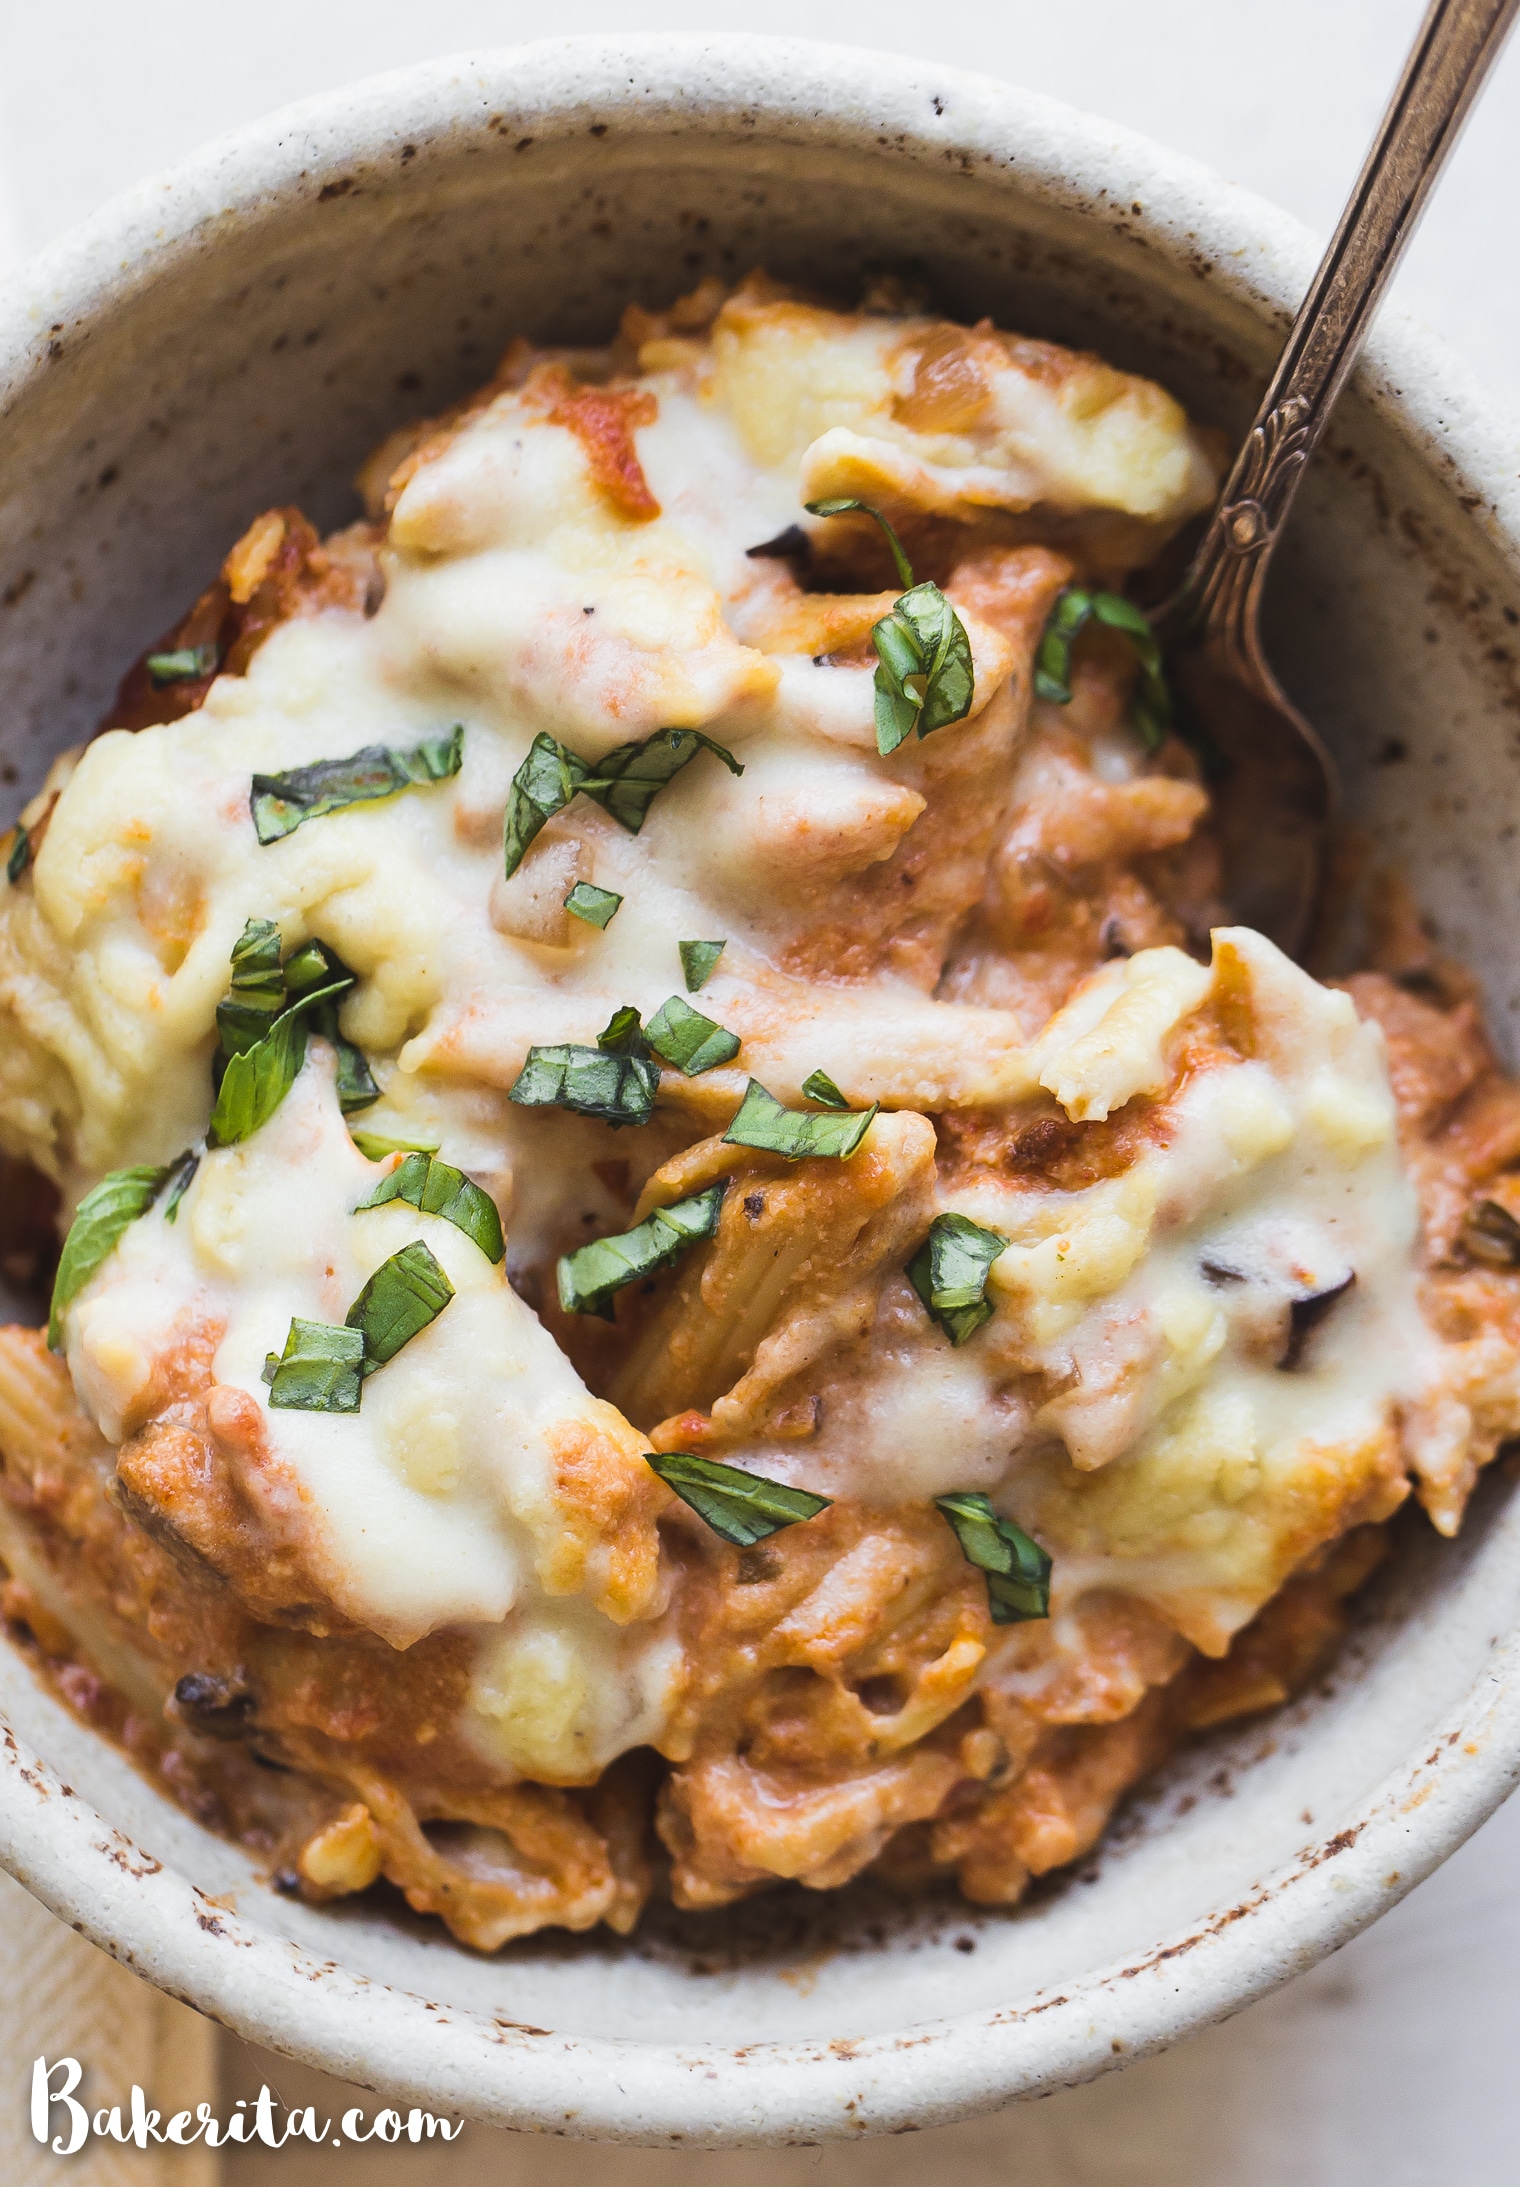 How to make Vegan Baked Ziti that's creamy, cheesy, and absolutely delicious! It's made with gluten-free noodles, marinara sauce, easy vegan ricotta cheese, and homemade vegan mozzarella sauce.